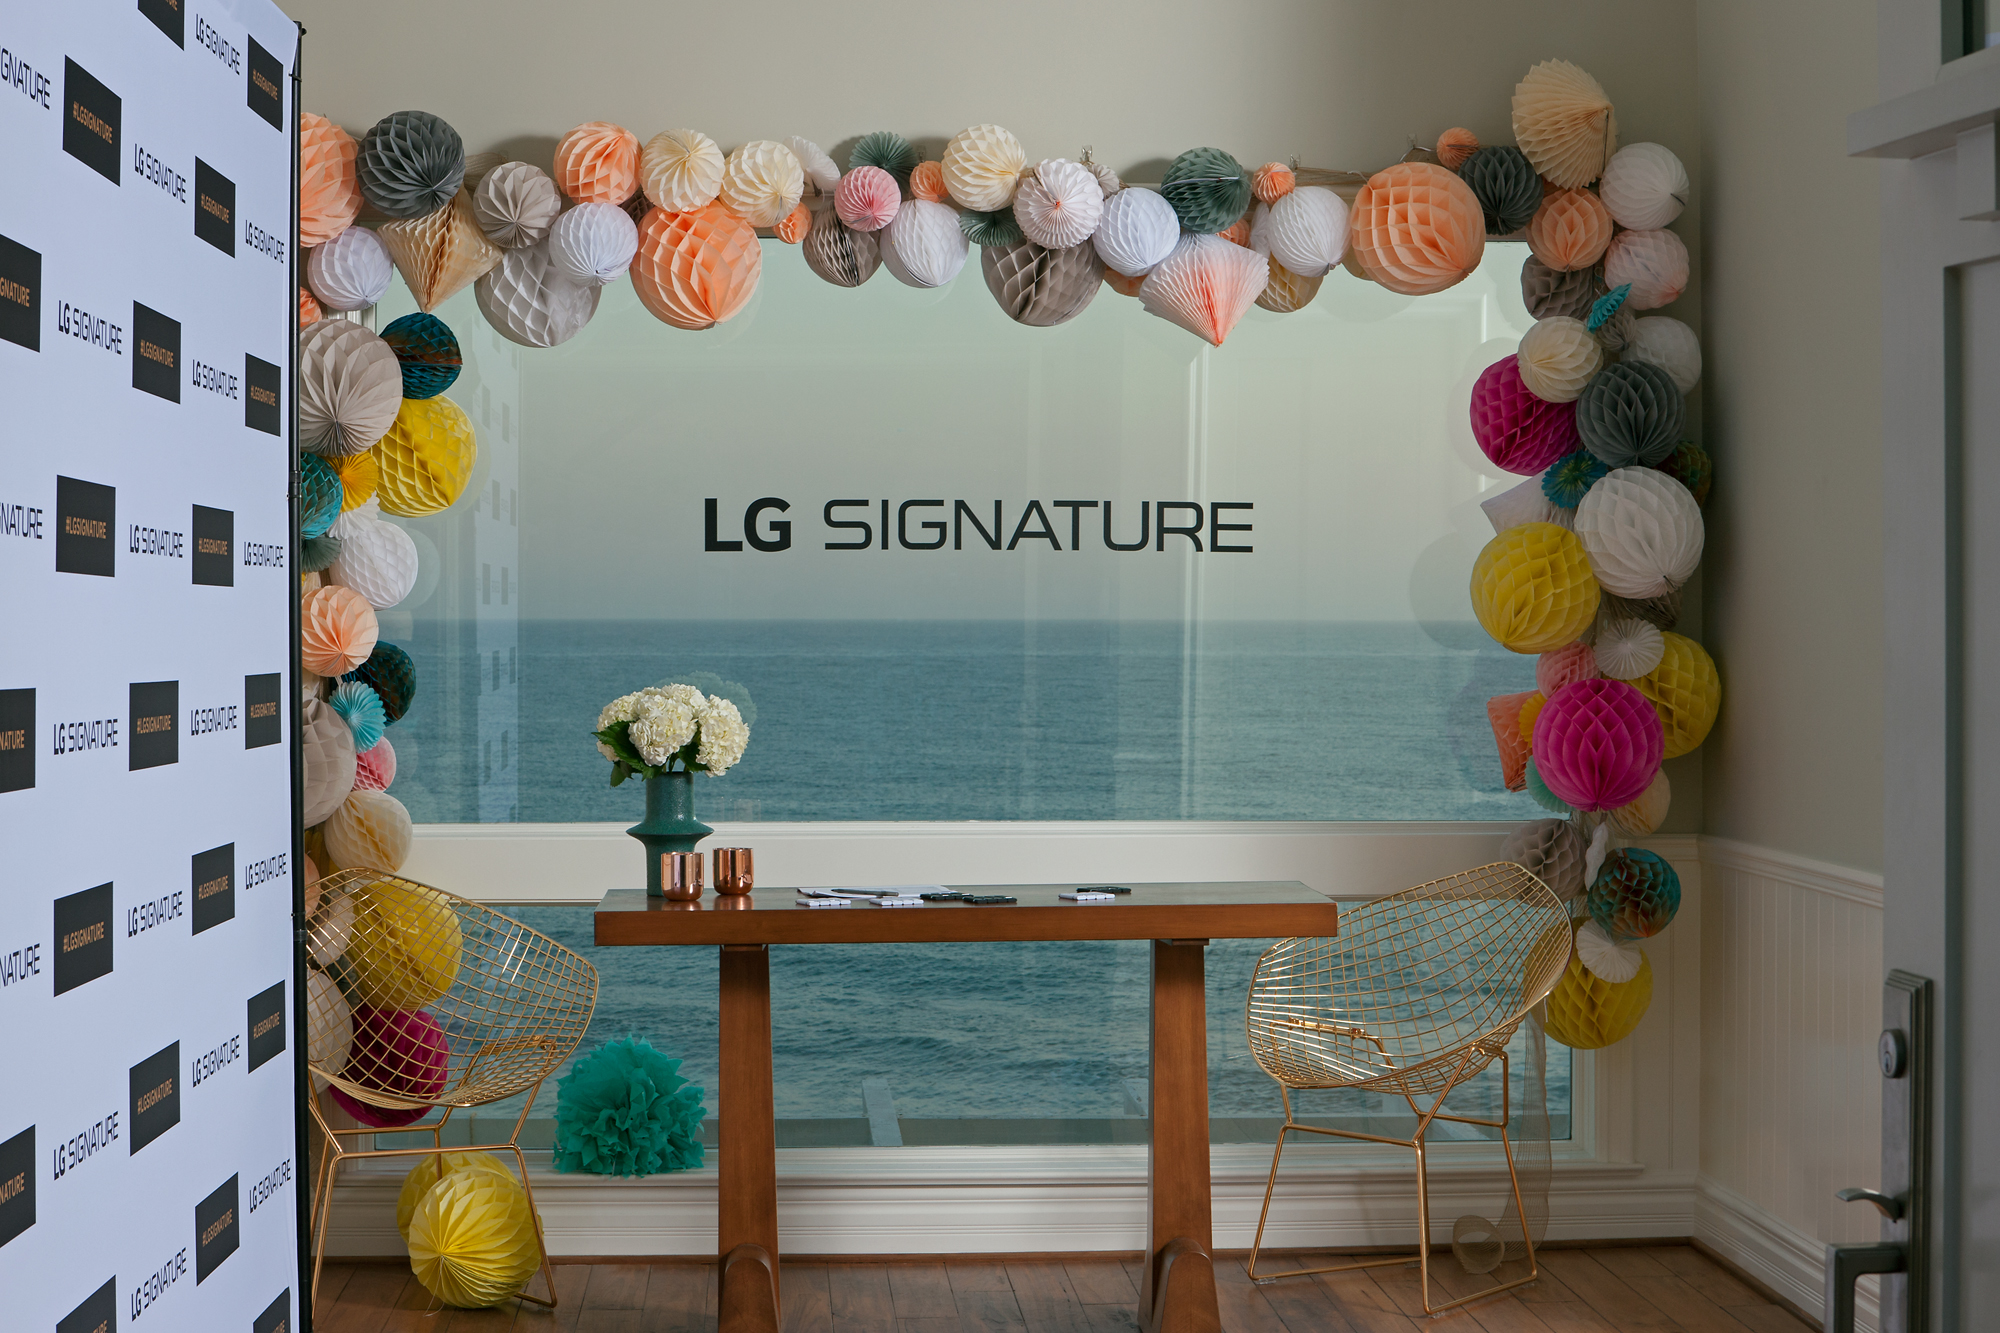 M Booth – LG Malibu Signature Event – Photography by Tom Bonner